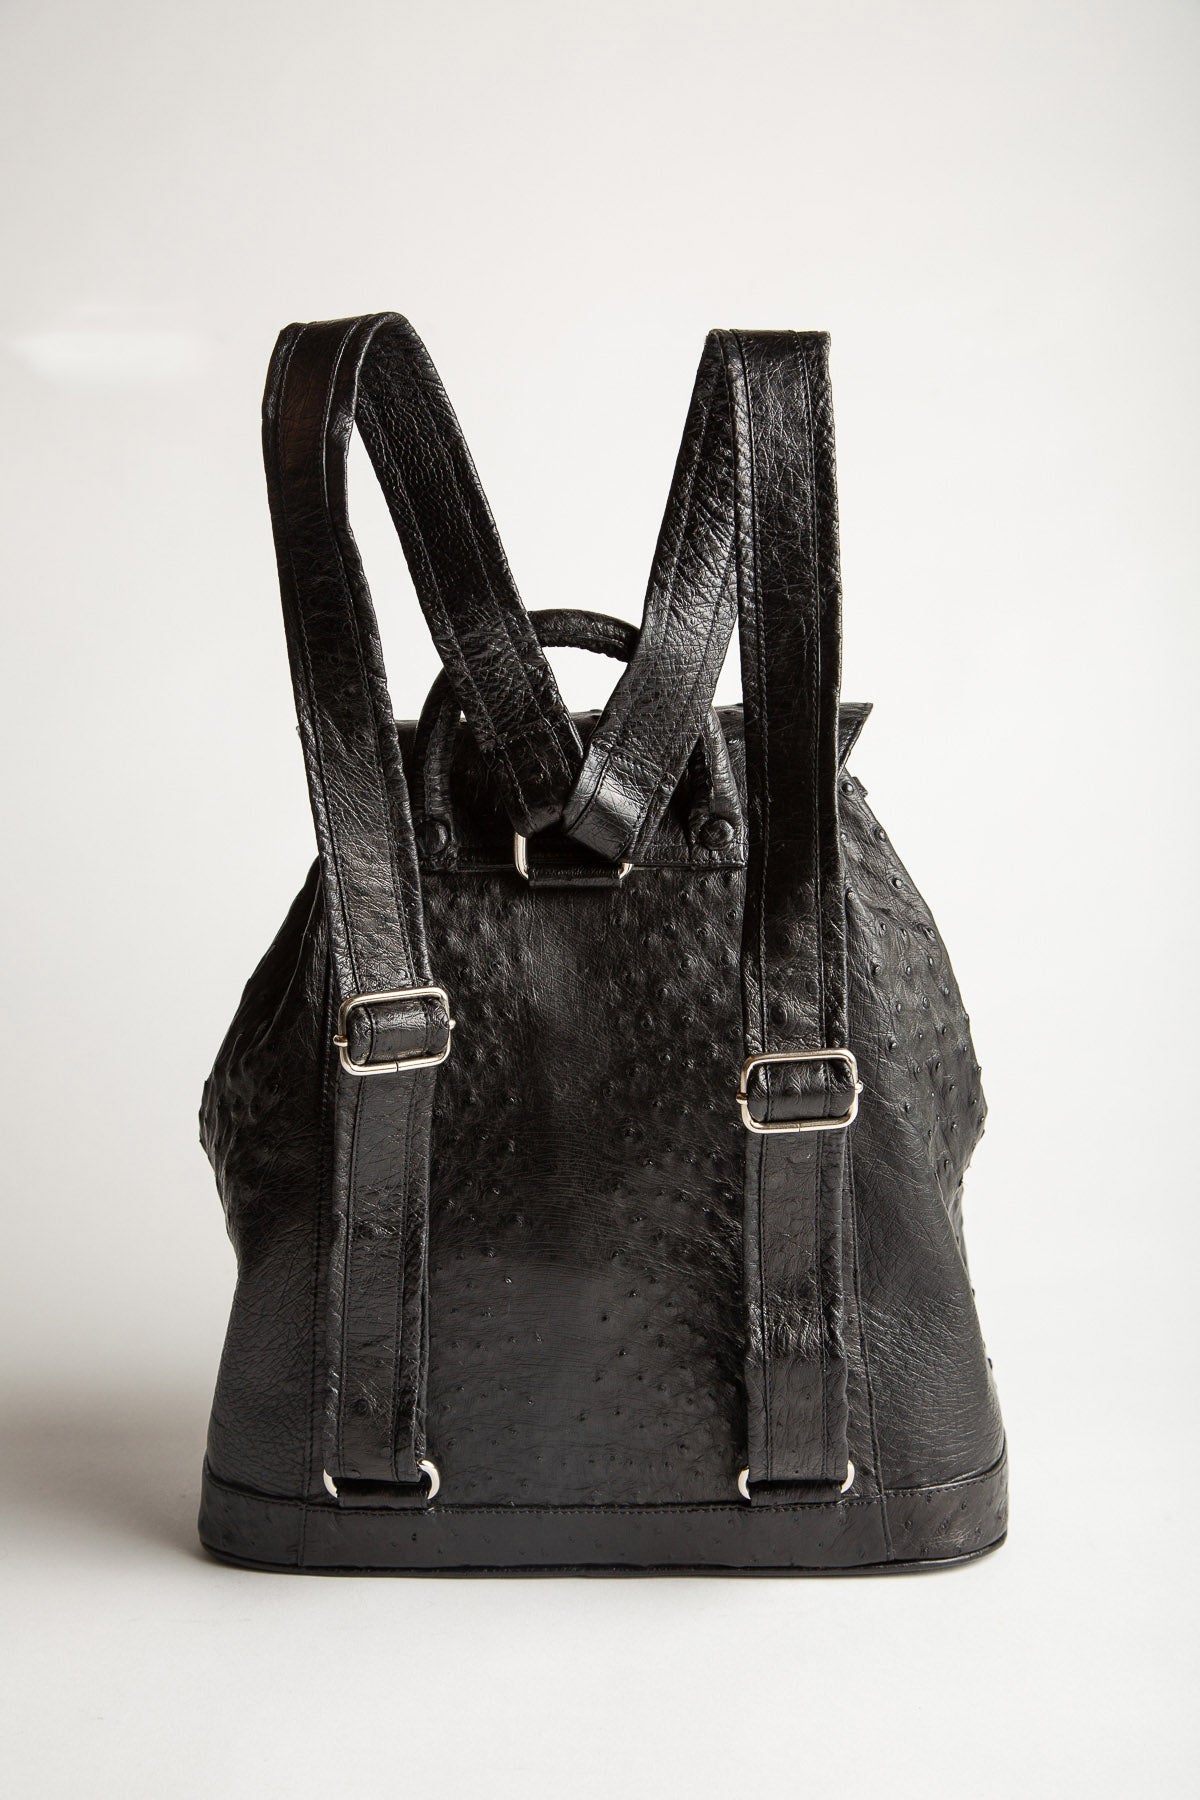 MAXFIELD PRIVATE COLLECTION | OSTRICH BACKPACK